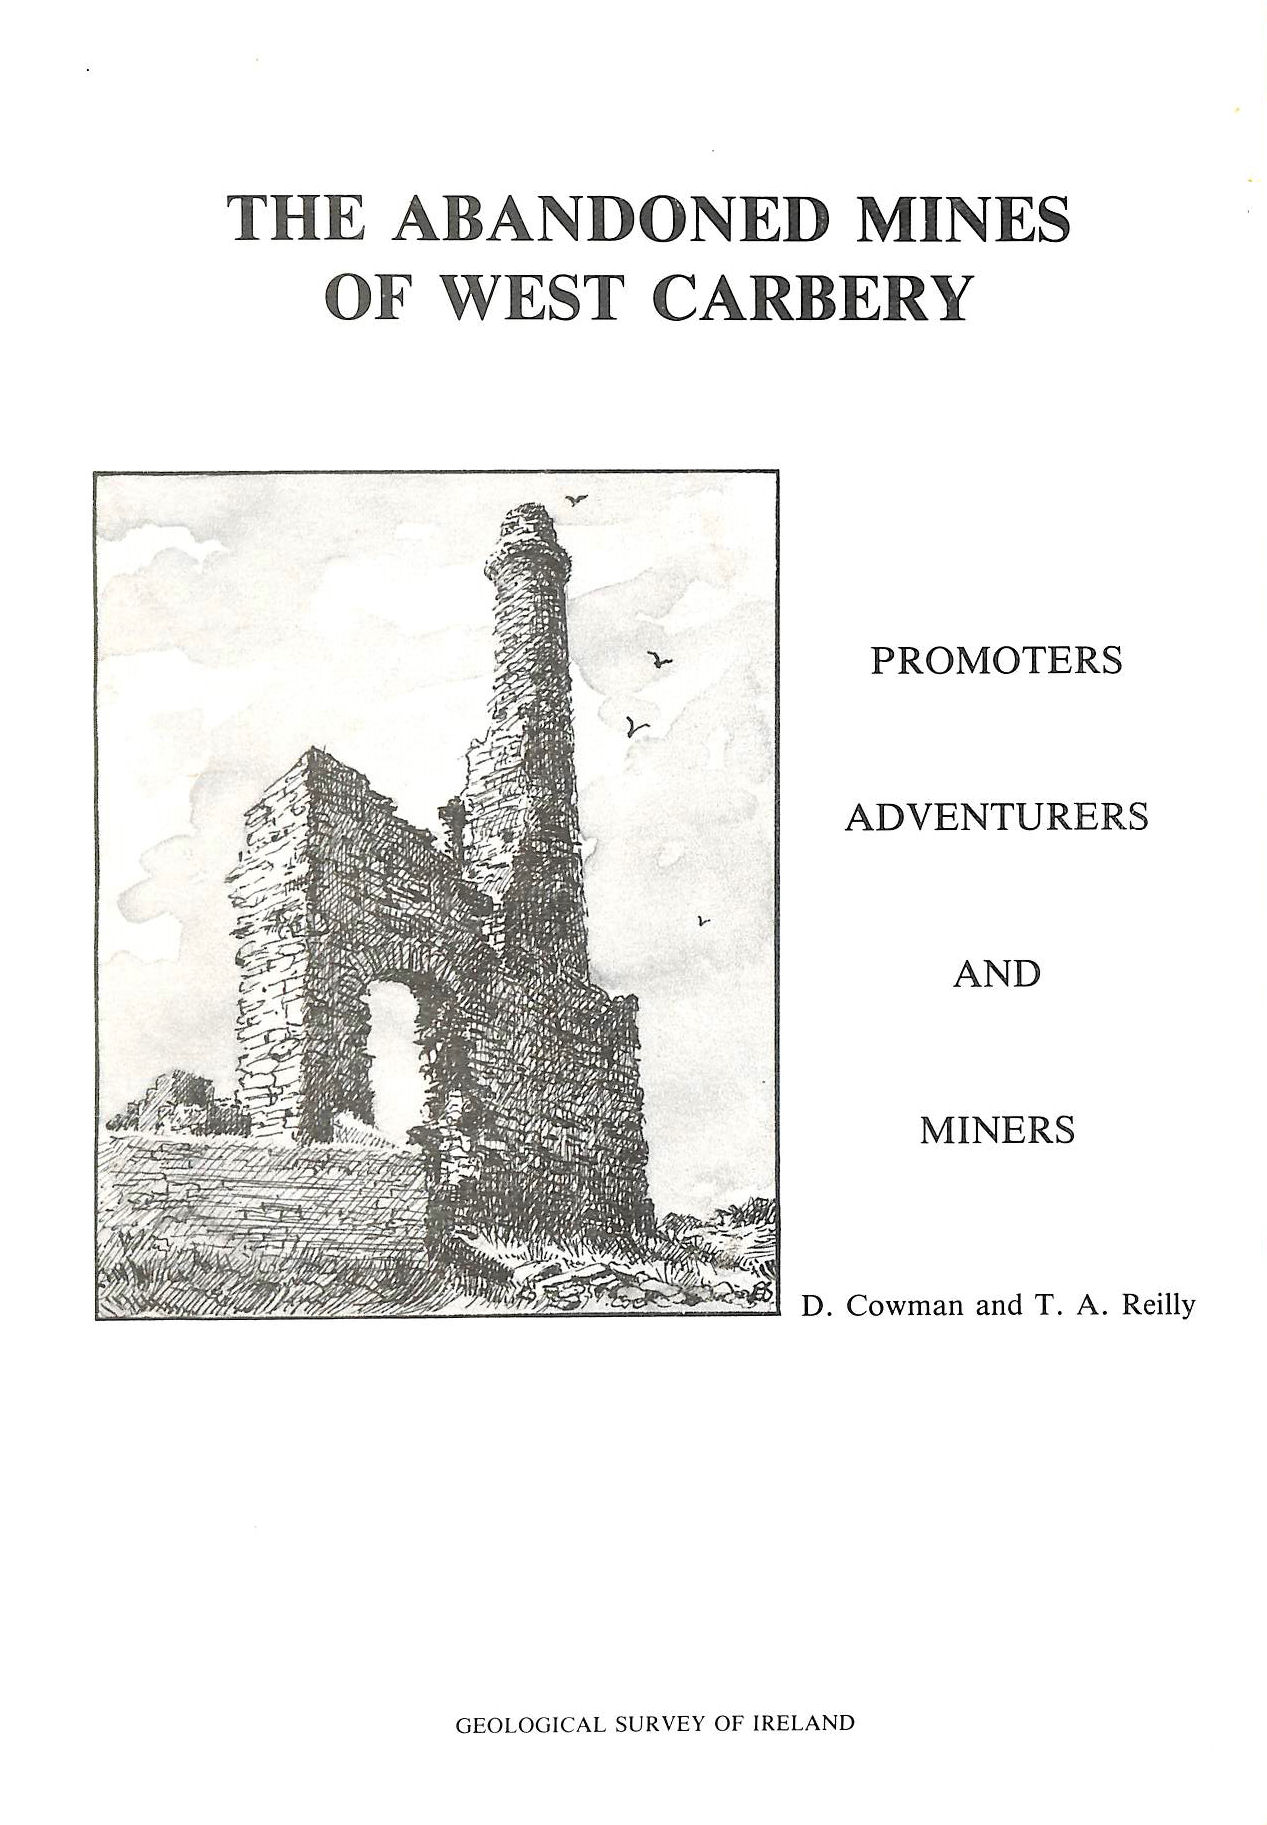 D COWMAN; T. A REILLY - The Abandoned Mines of West Carbery